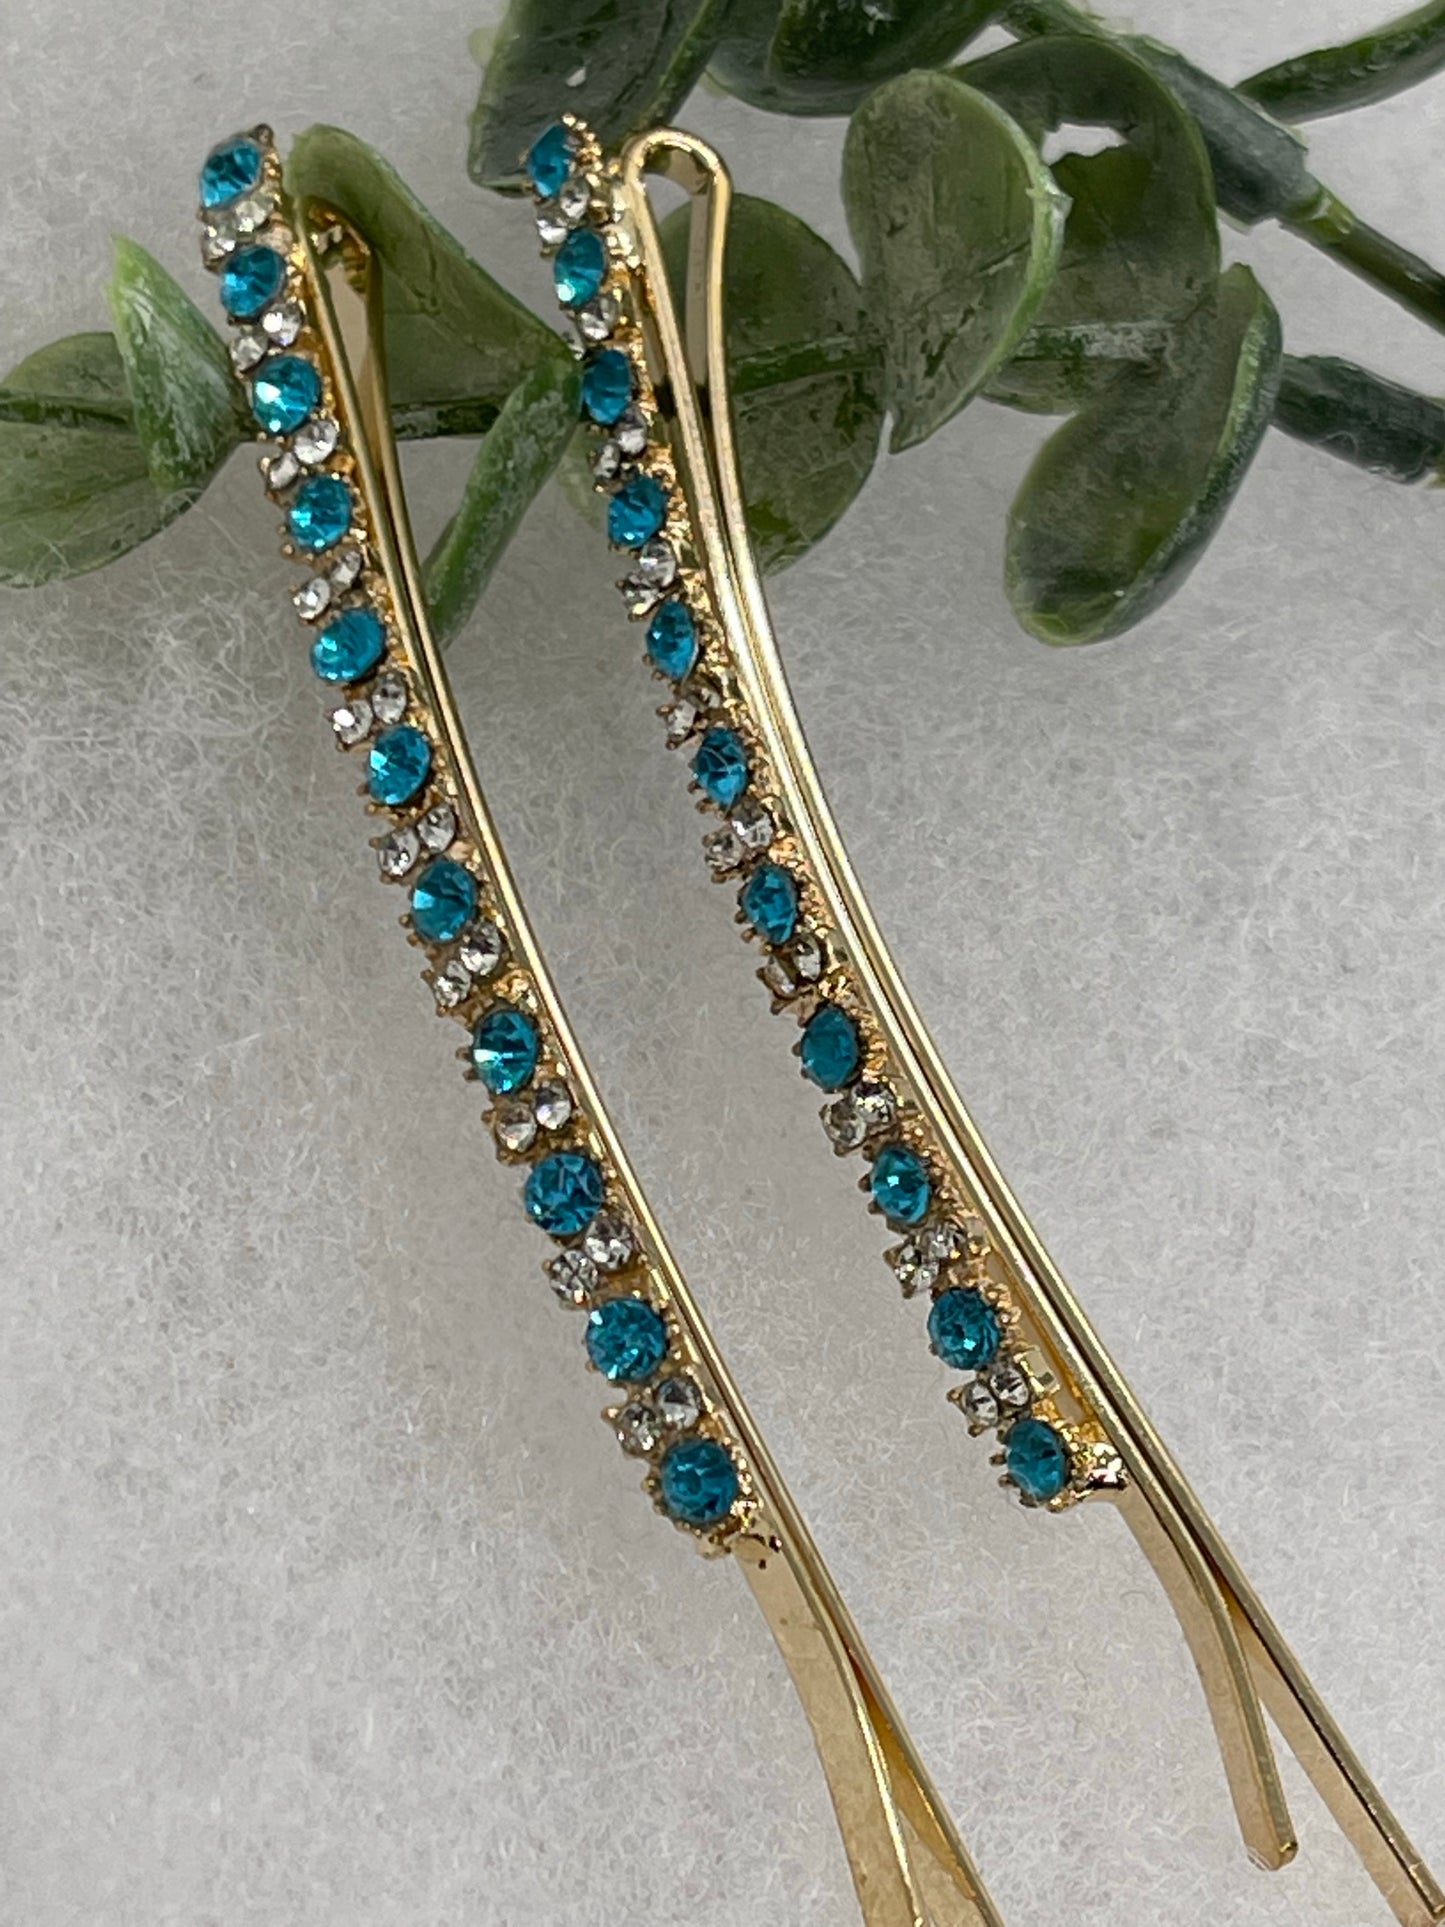 Teal crystal rhinestone approximately 3.5” large gold tone hair pins 2 pc set wedding bridal shower engagement formal princess accessory accessories